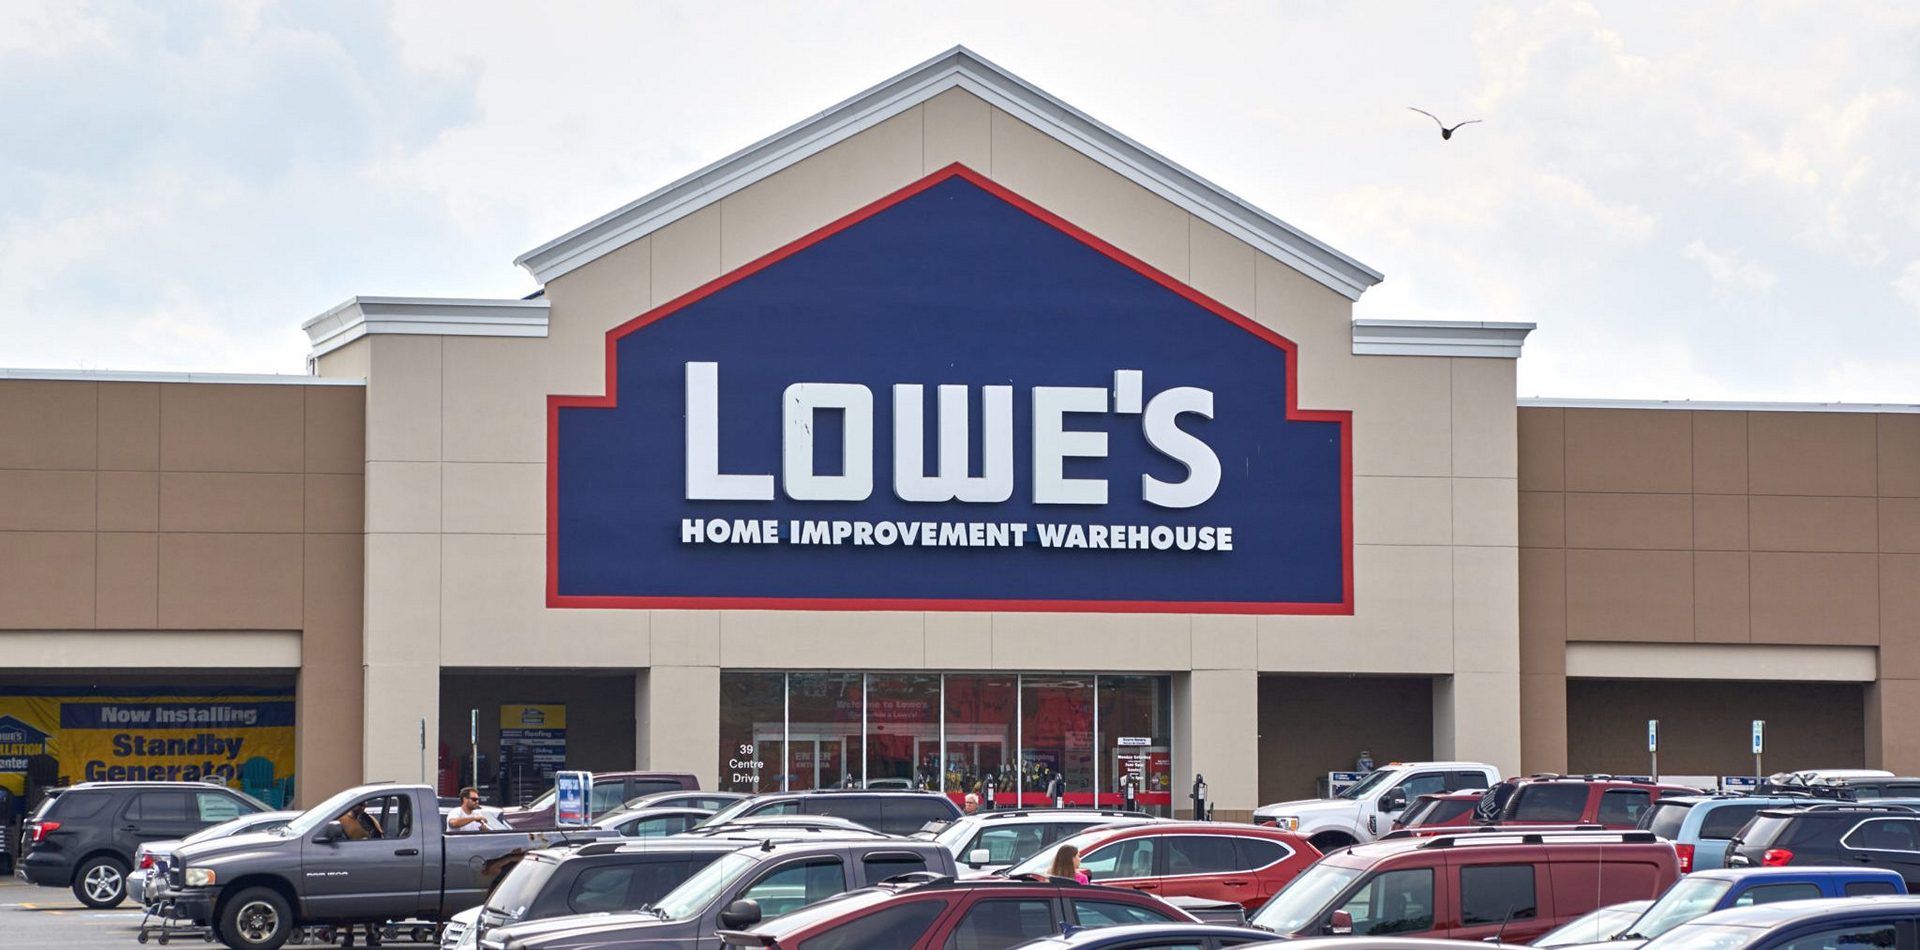 Who is Lowe's Biggest Competitor